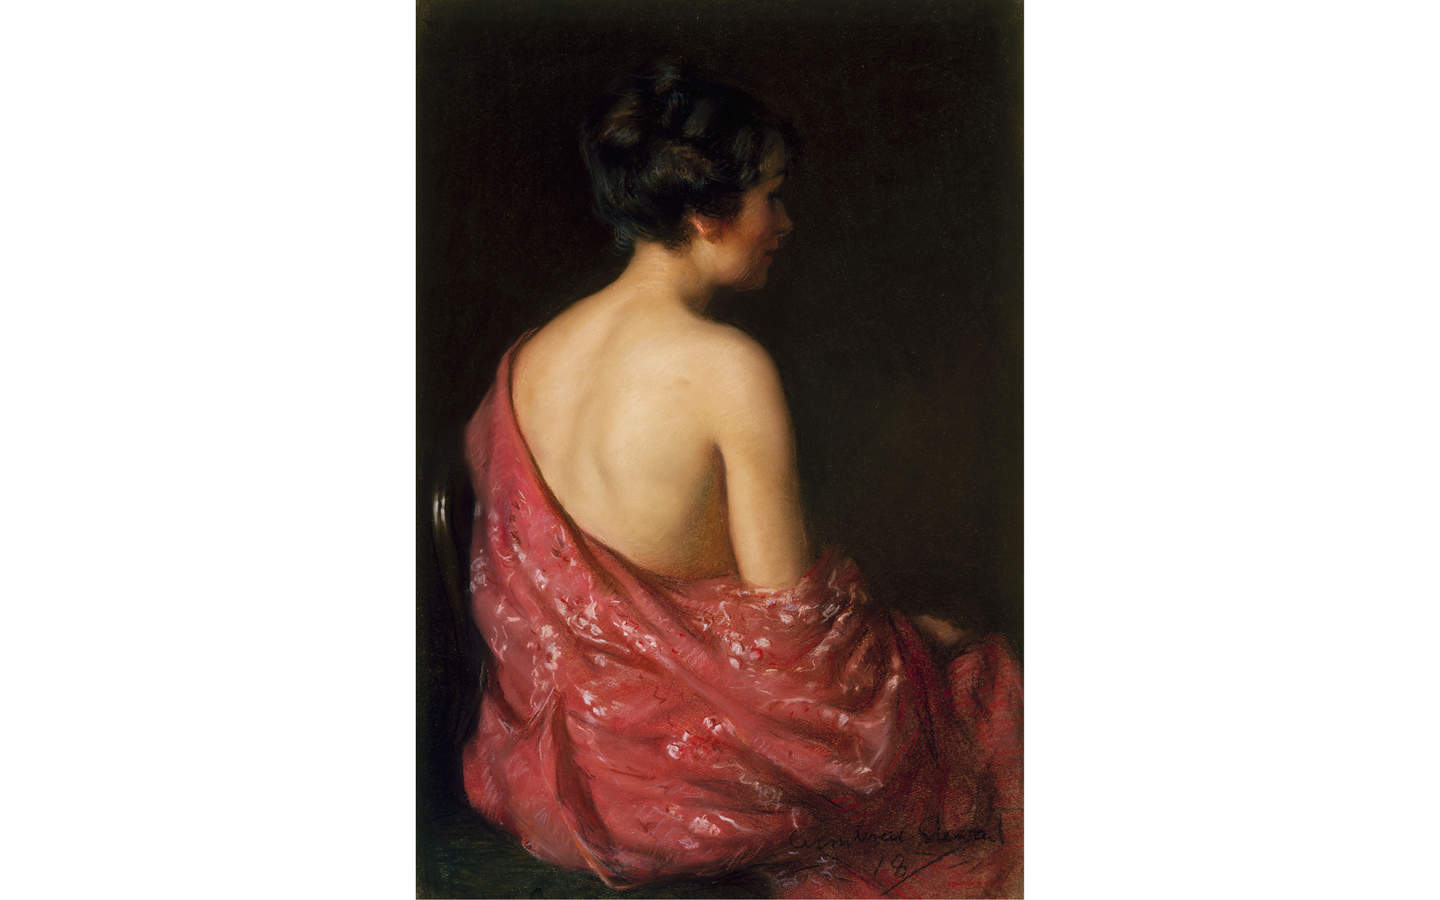 Pastel drawing of a seated woman with brunette hair pinned up. Her bare back faces the viewer and a pink floral fabric is draped over her body.